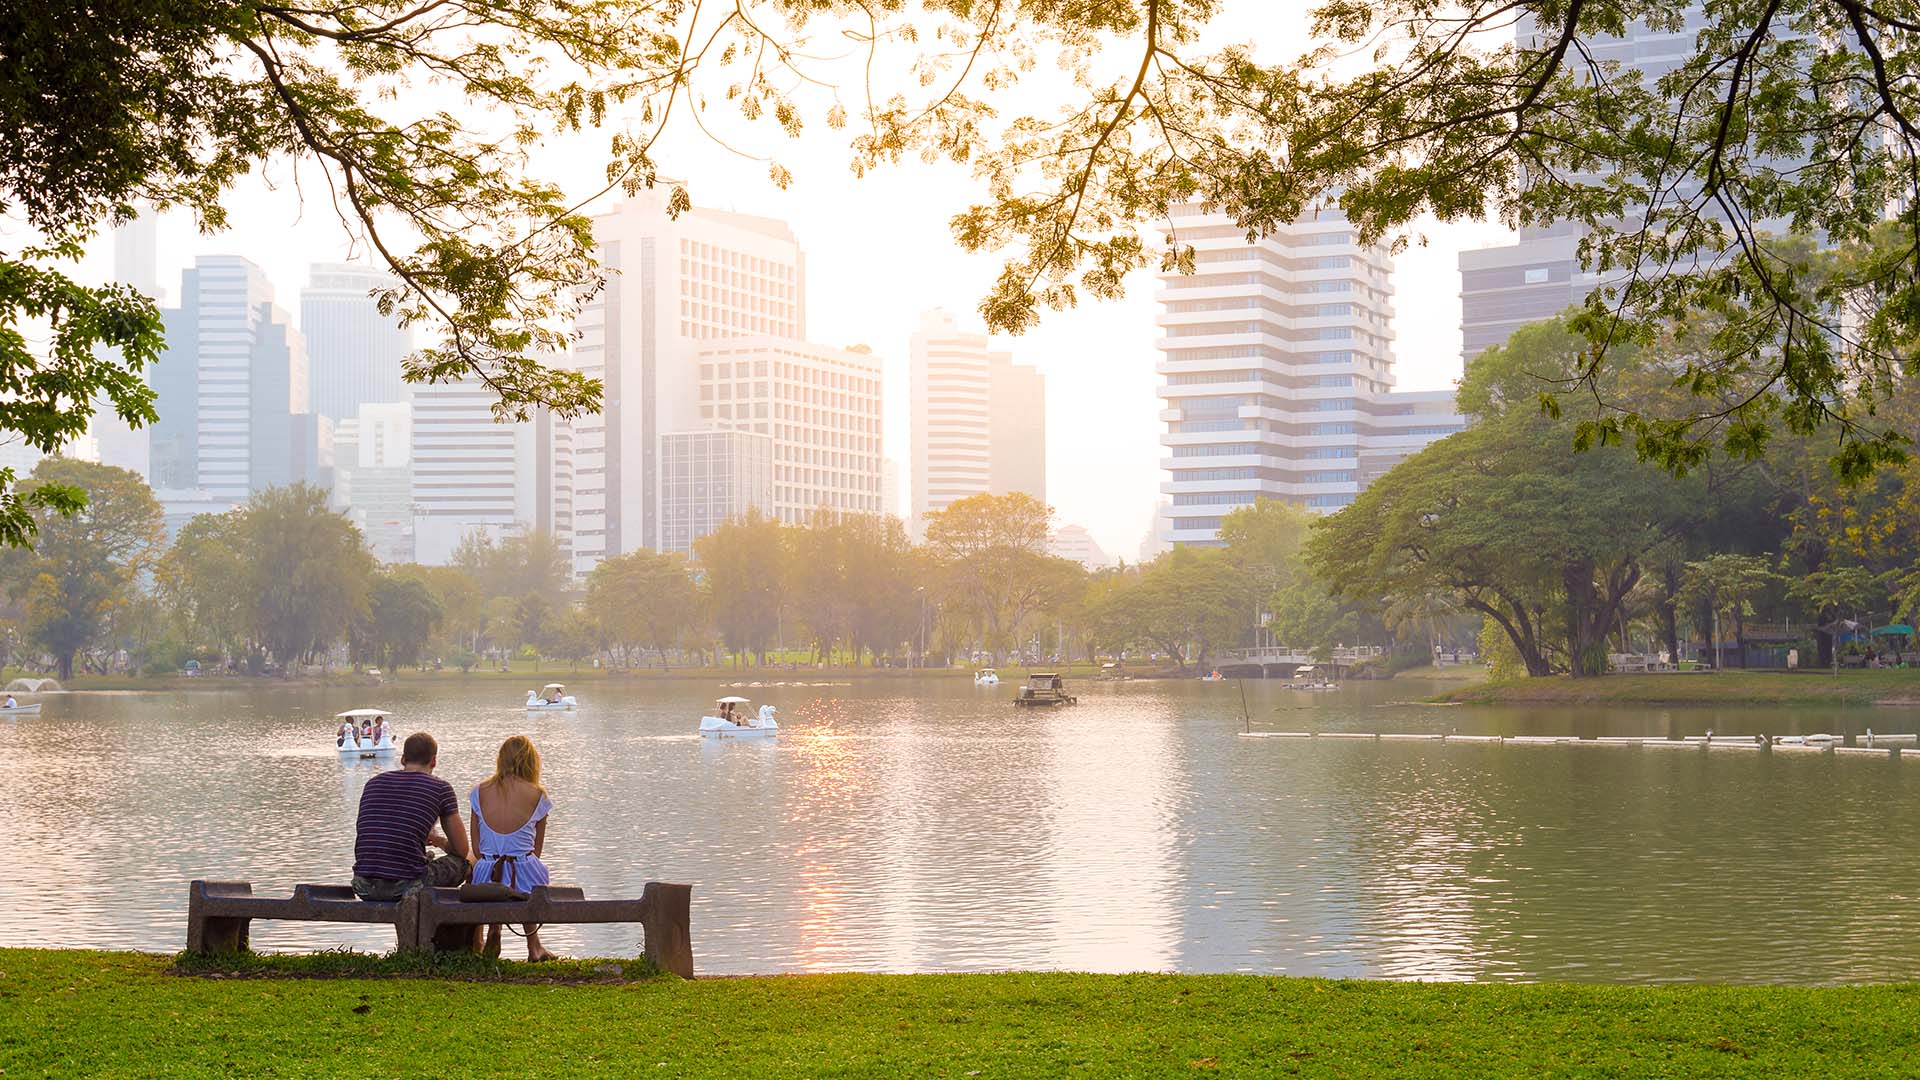 Two people sit on a bench in front of a lake in Lumpini Park in Bangkok, Thailand